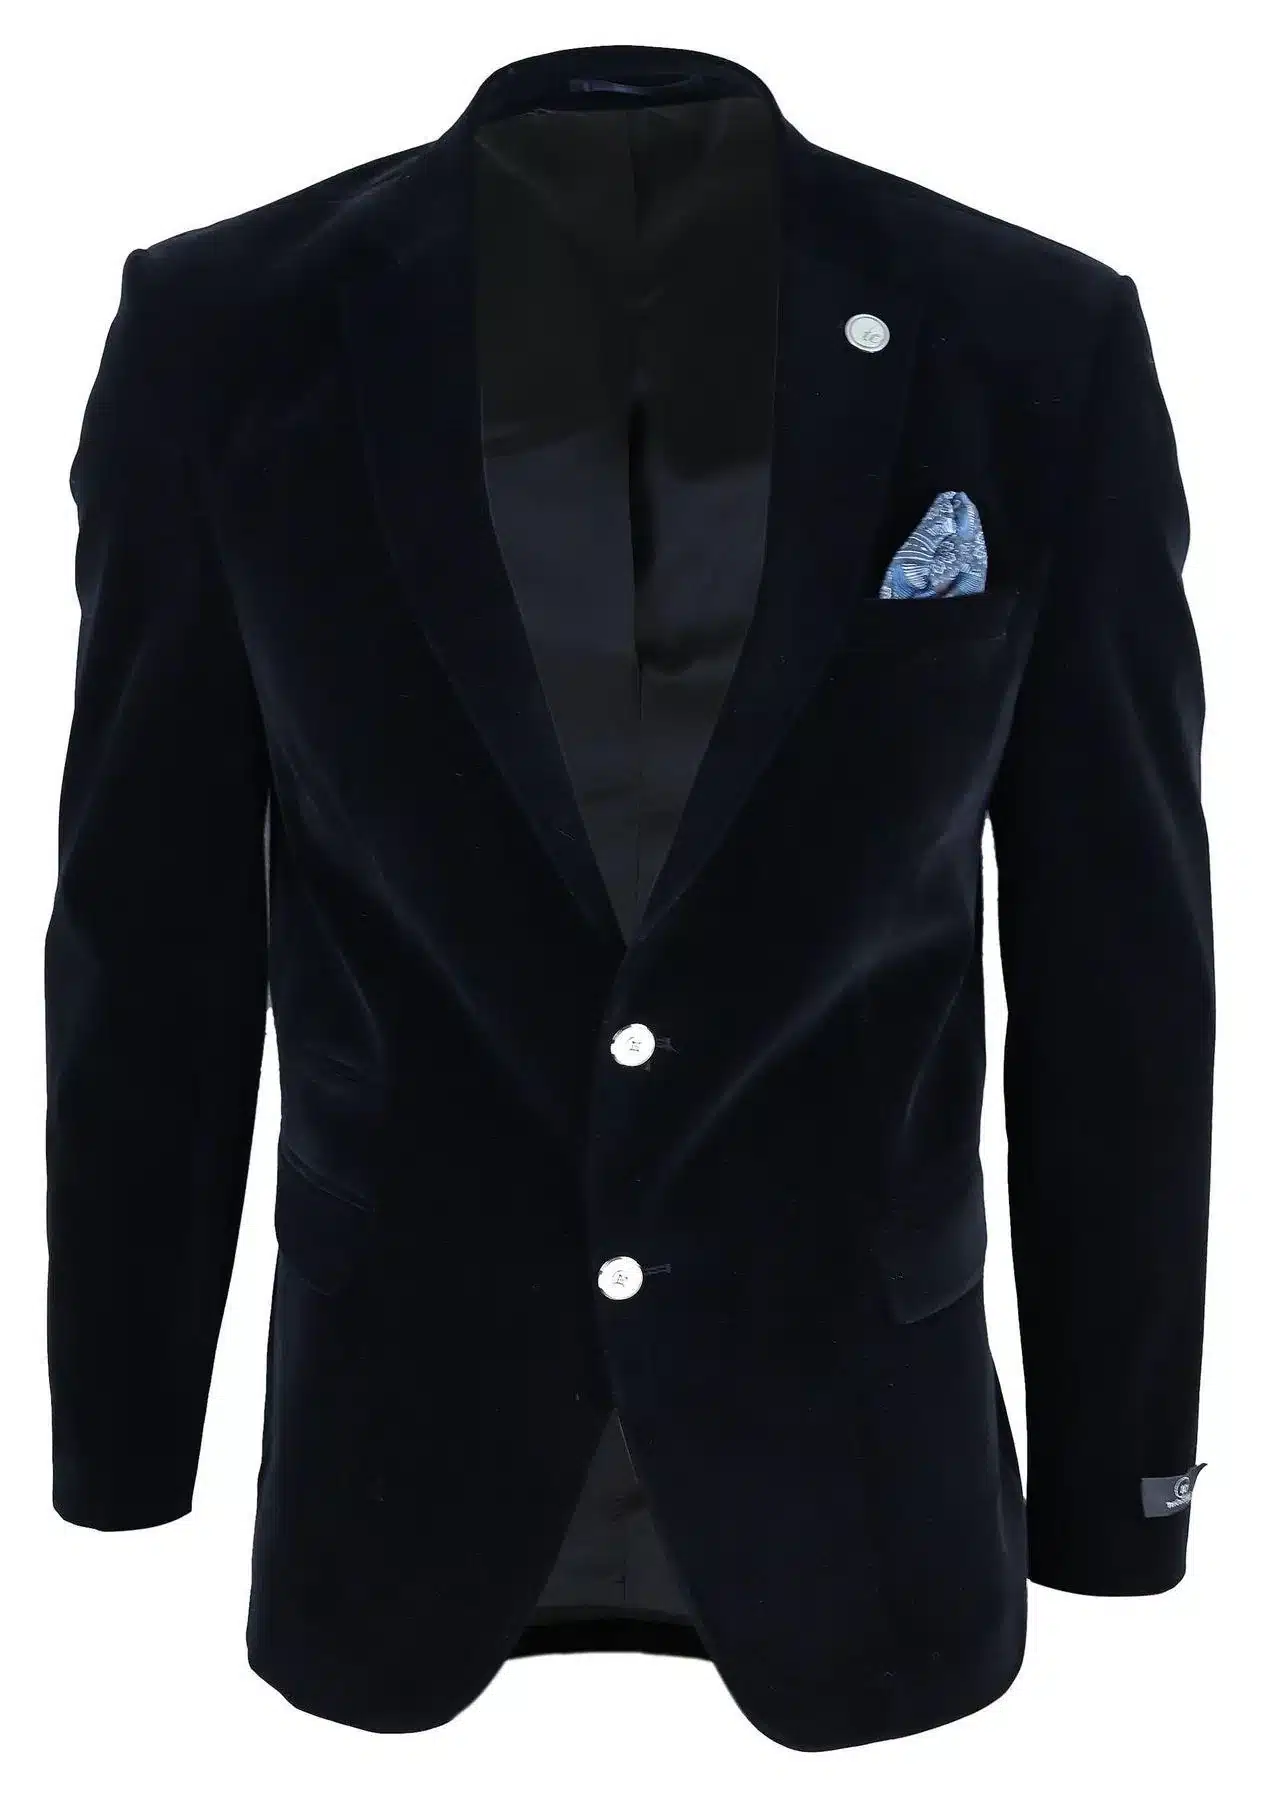 Mens Jackets To Wear Over Suits | lupon.gov.ph